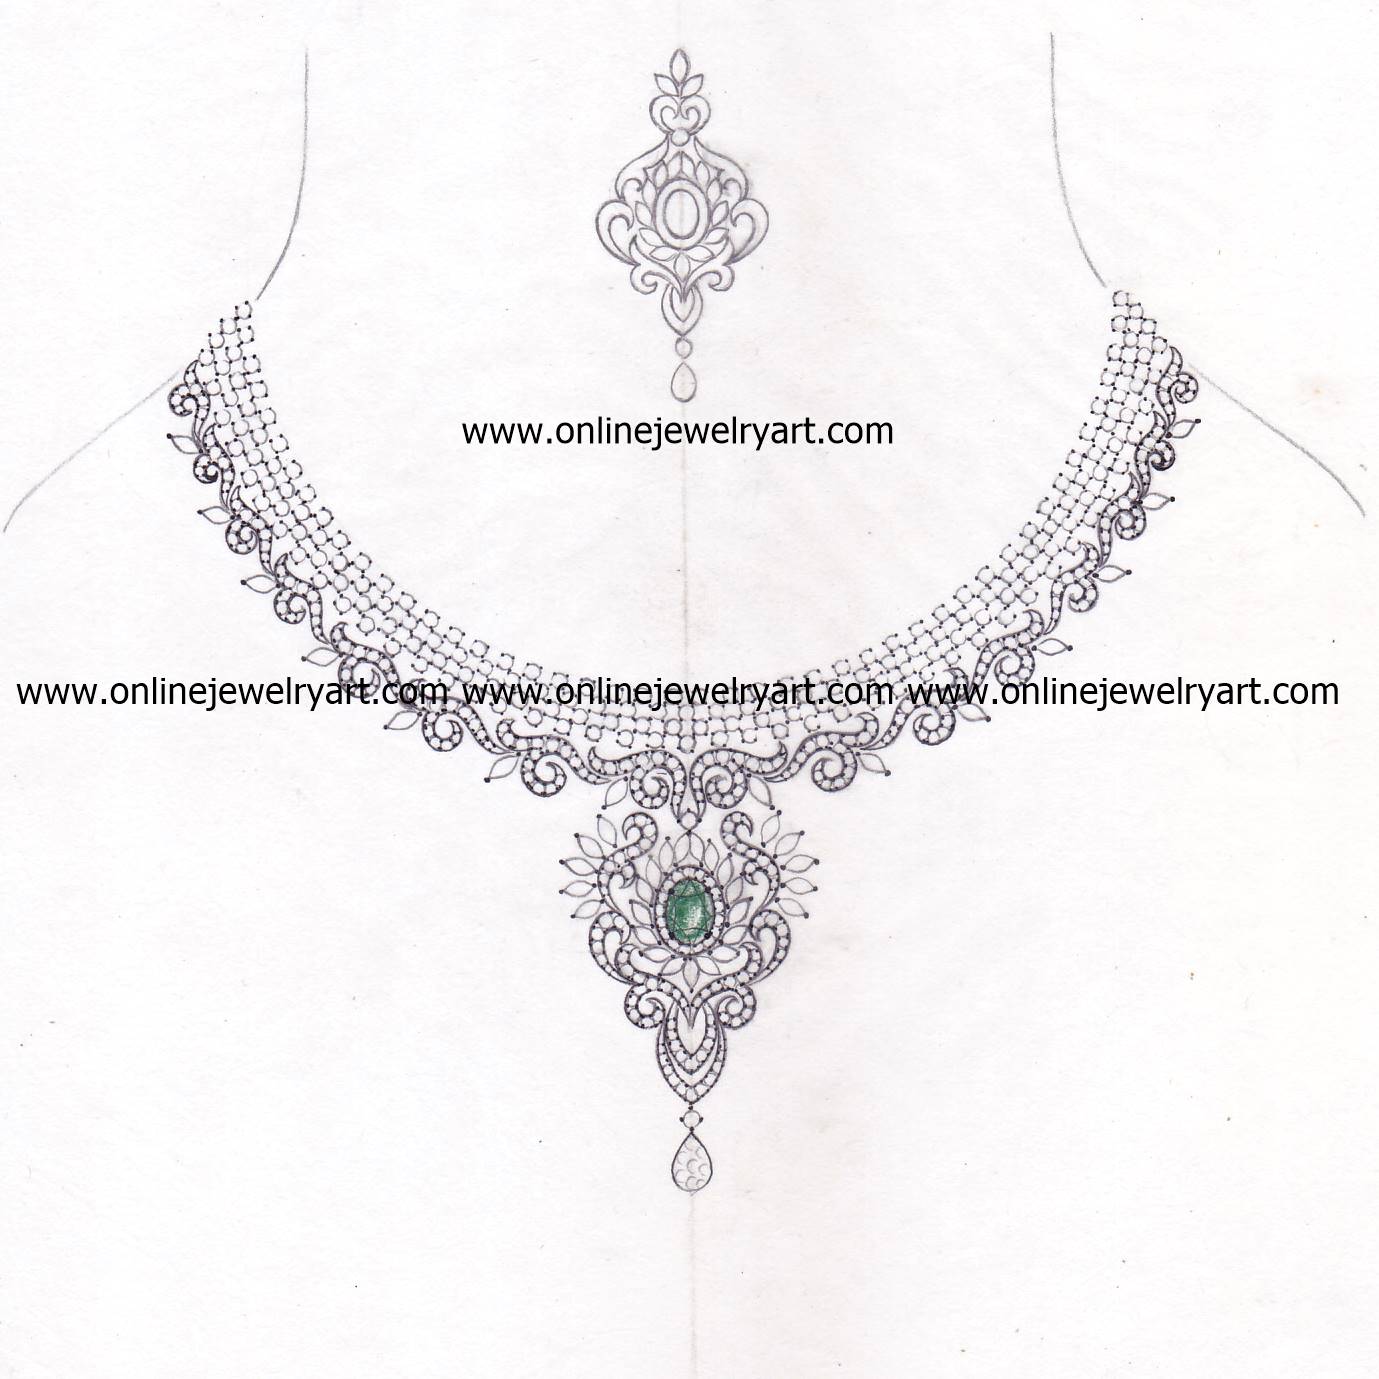 Designer design diamond jewelry drawing sketches making works craft unique  handmade luxury necklaces product ideas Stock Photo  Adobe Stock